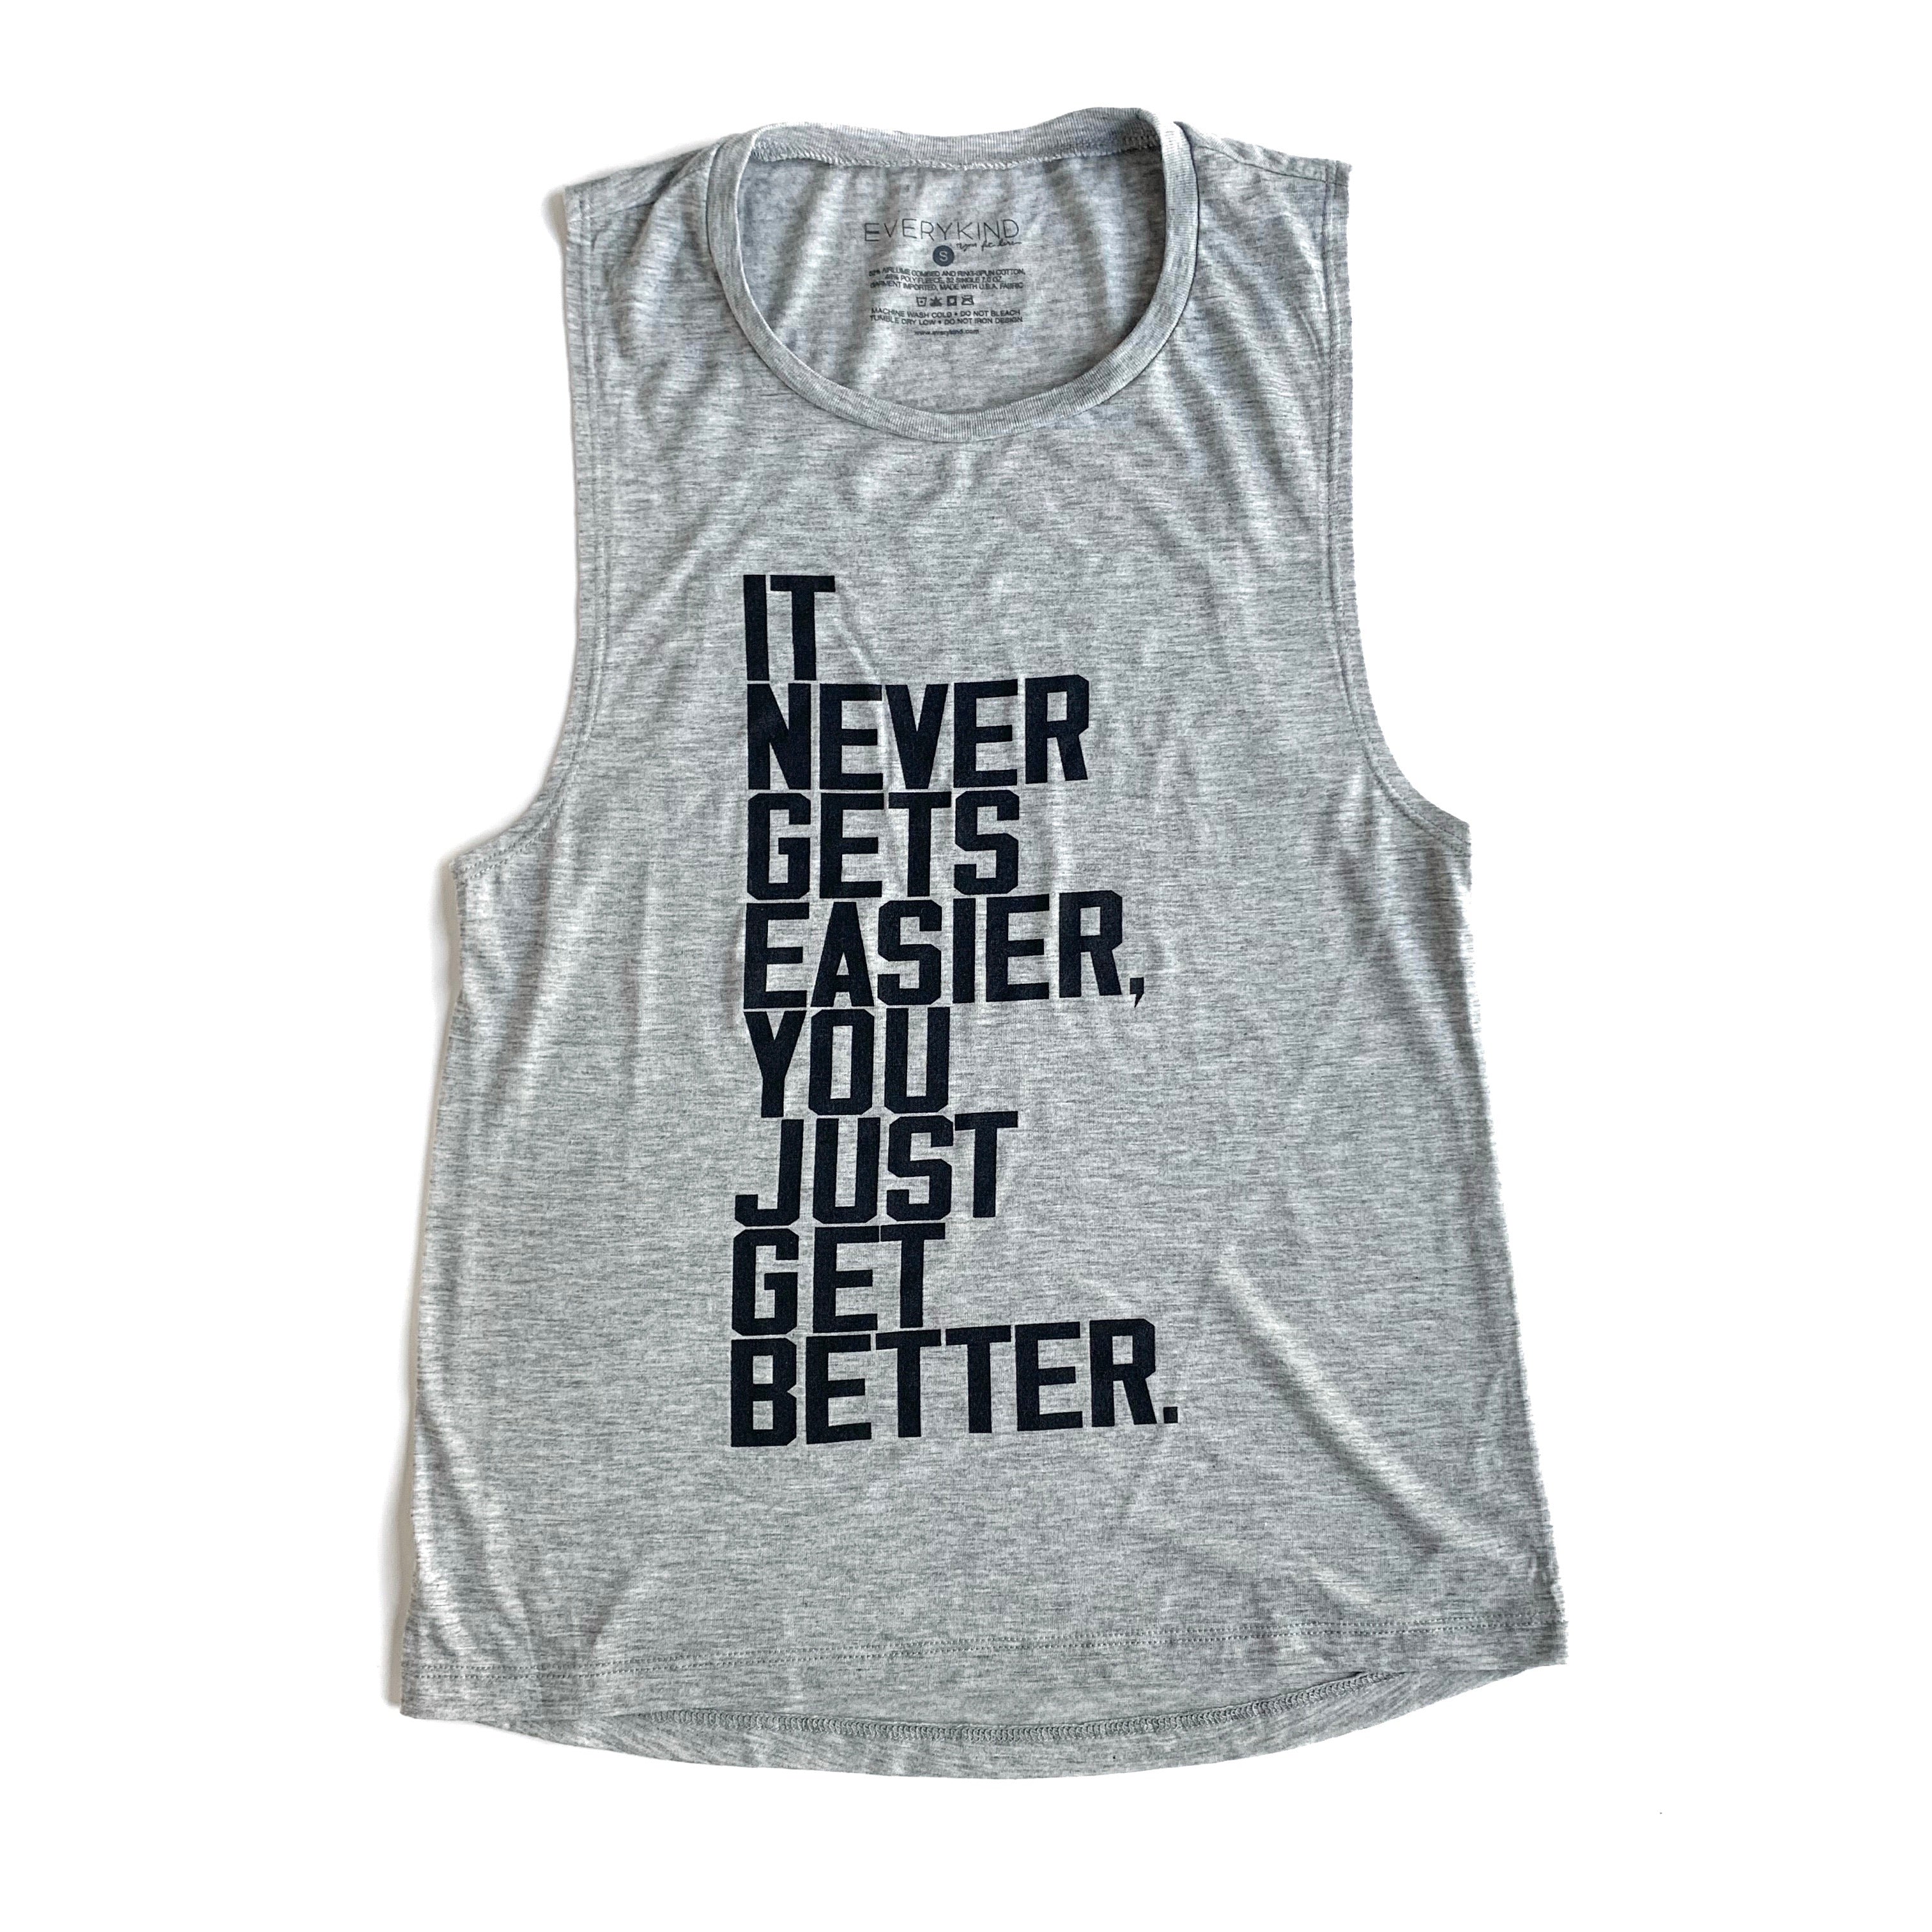 EVERYKIND- IT NEVER GETS EASIER, YOU JUST GET BETTER T-SHIRT